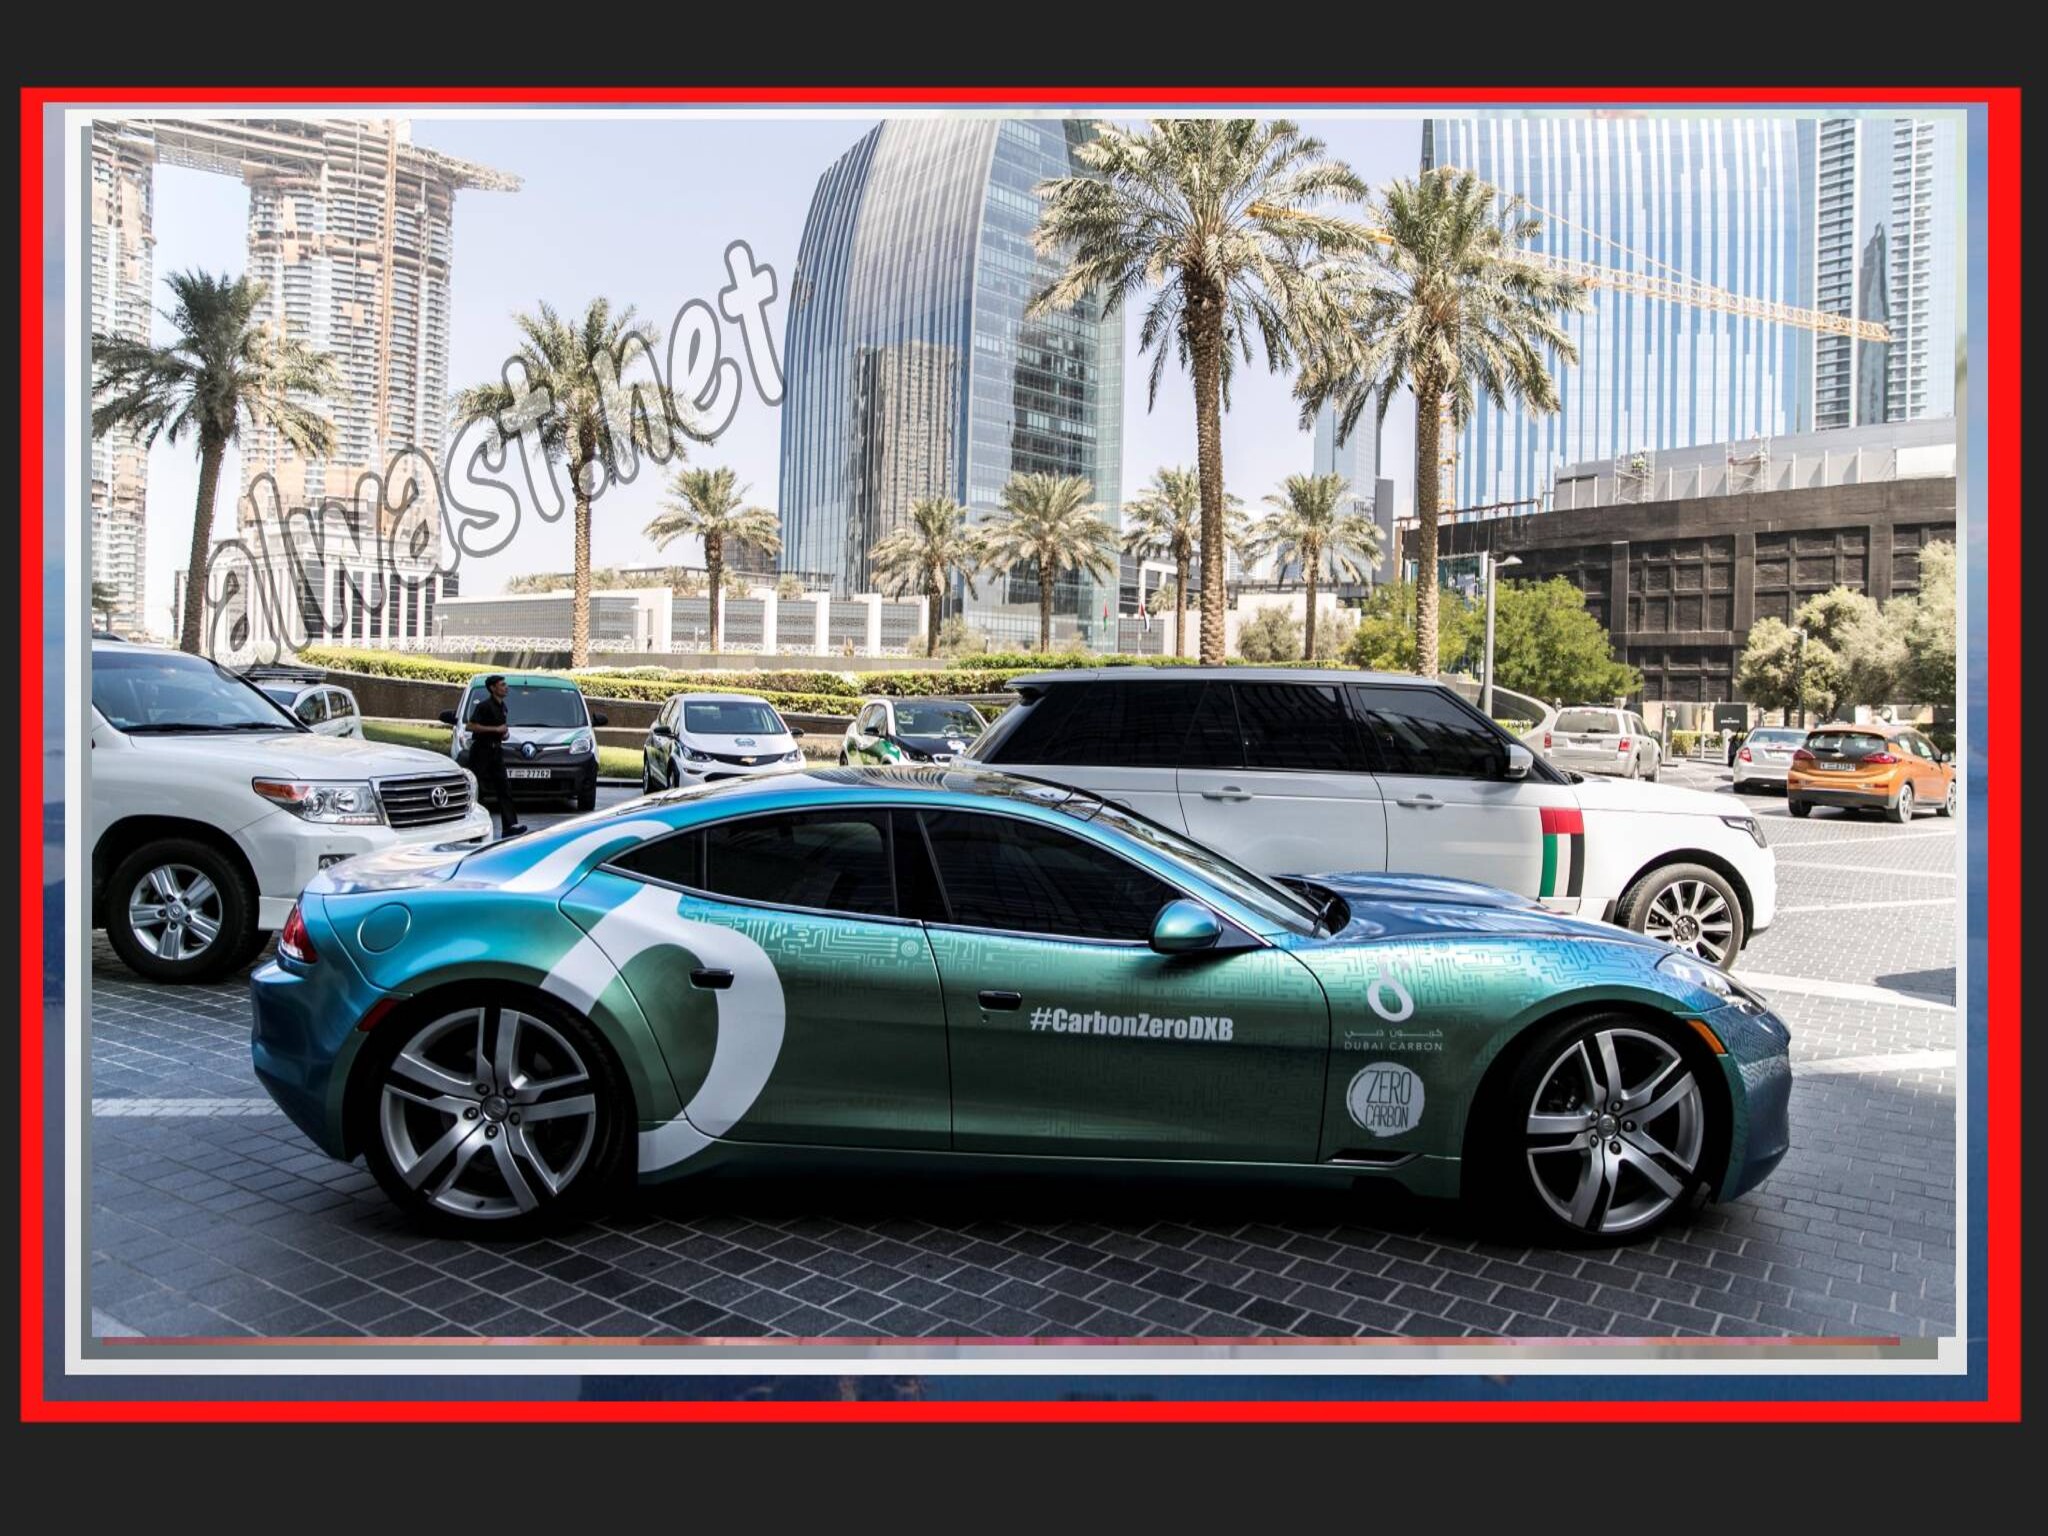 Dubai announces parking lots that include charging for electric cars